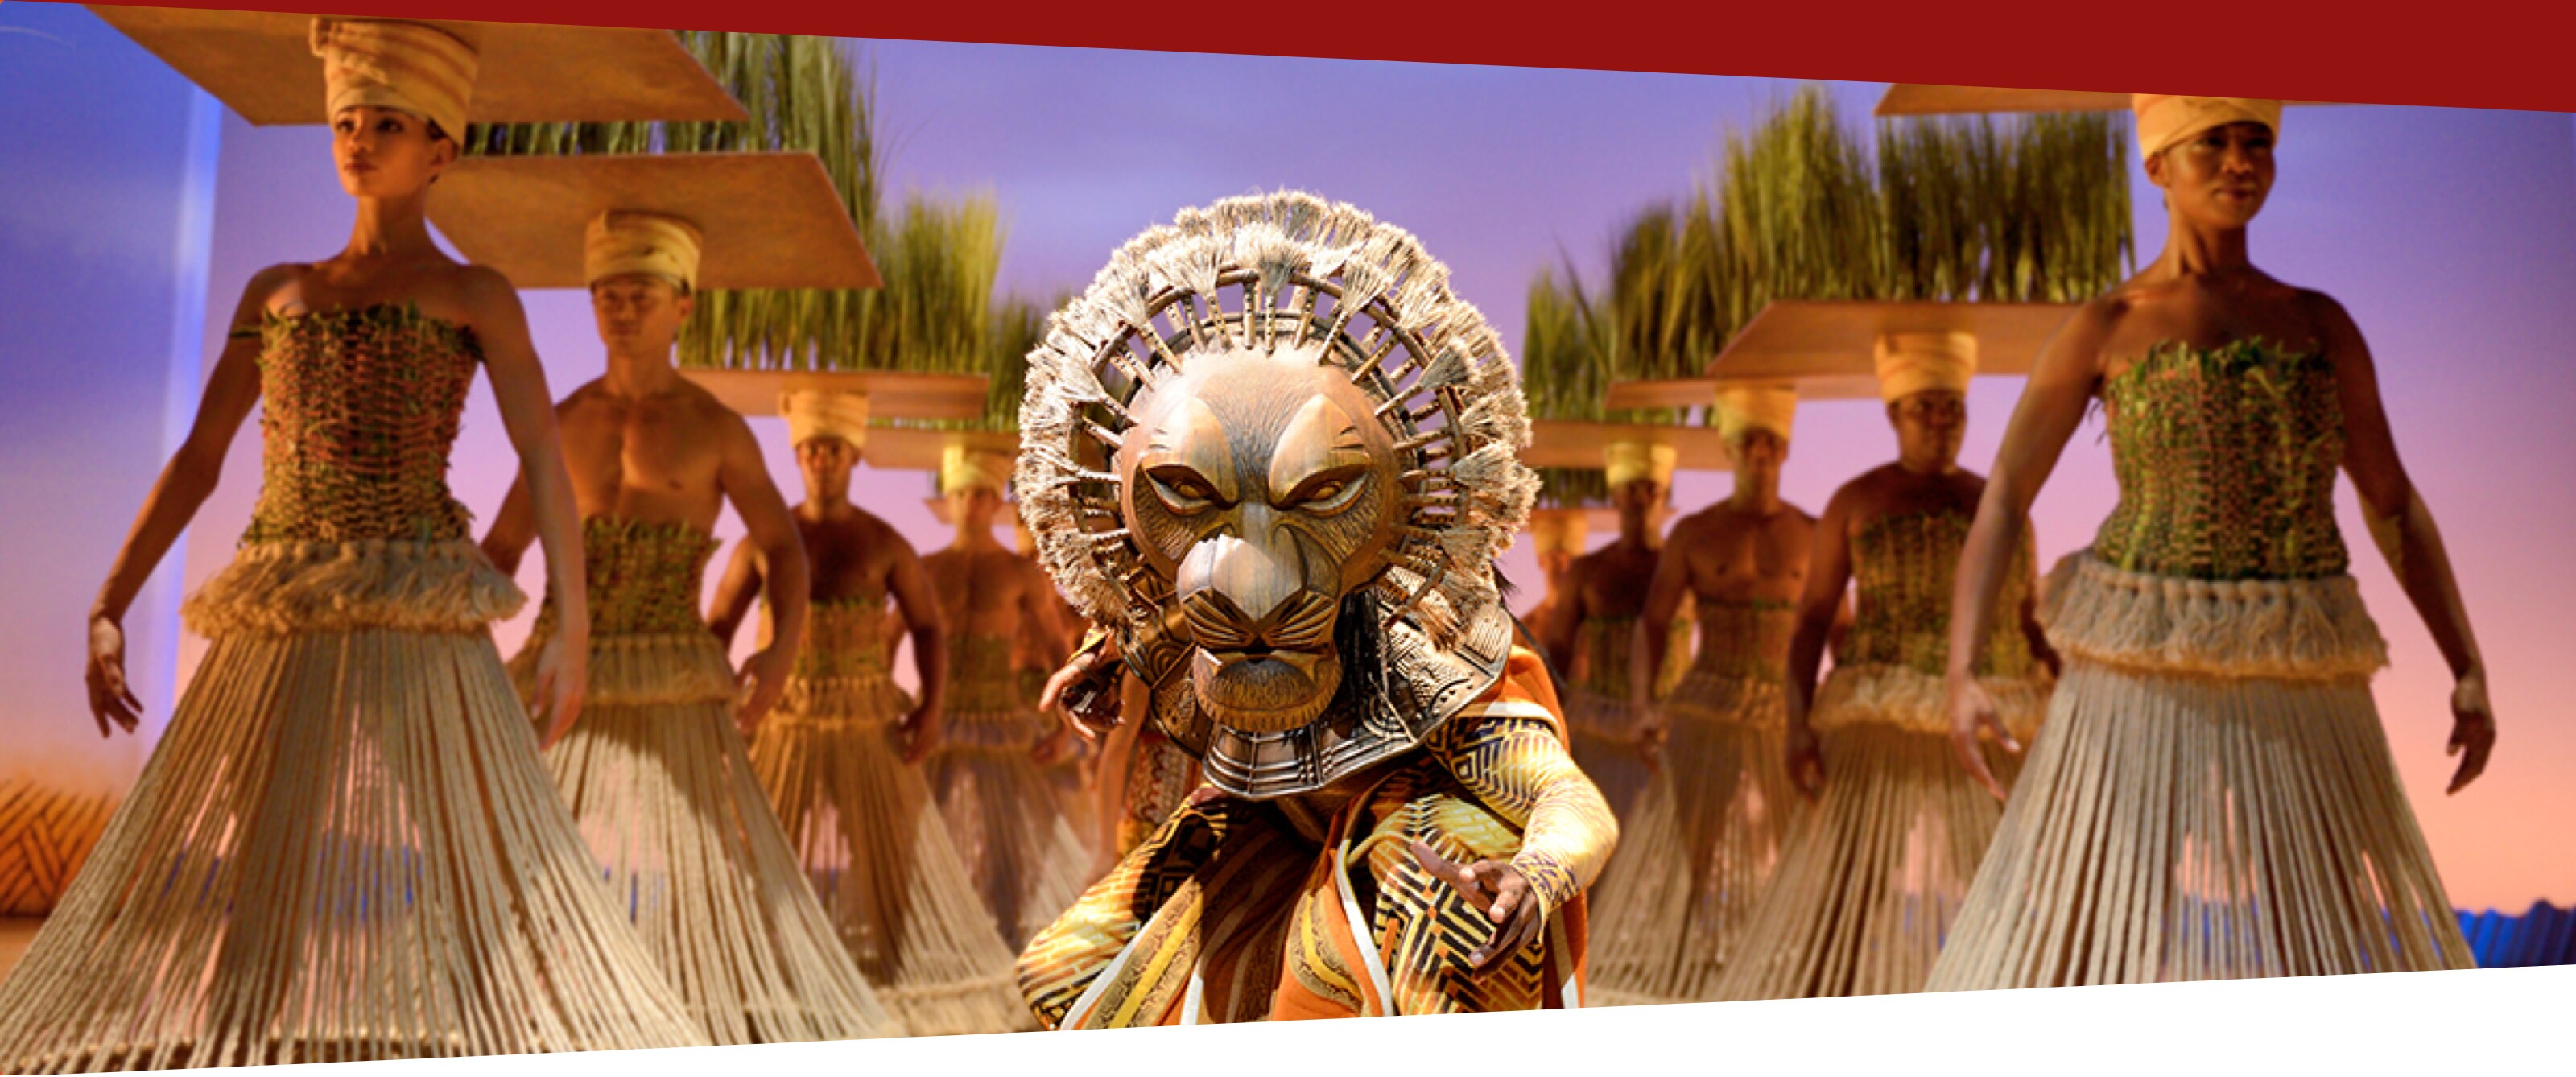 Image of Simba from the stage show The Lion King